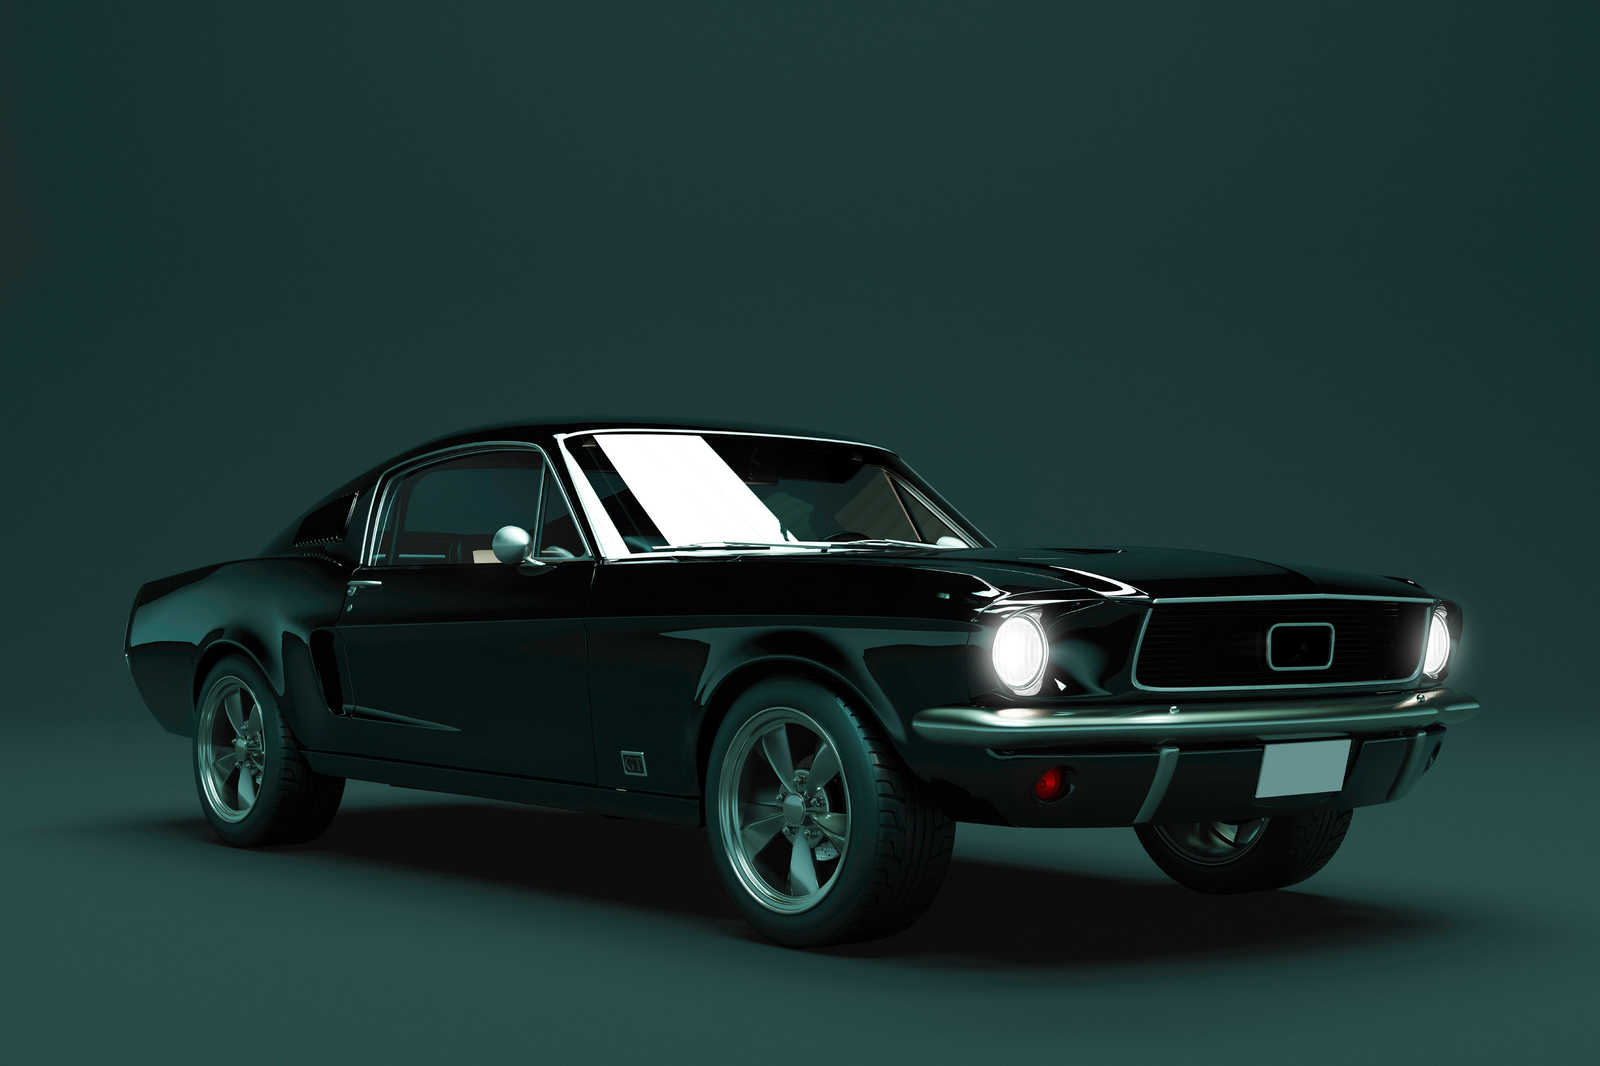             Mustang 2 - Canvas painting, Mustang 1968 Vintage Car - 0.90 m x 0.60 m
        